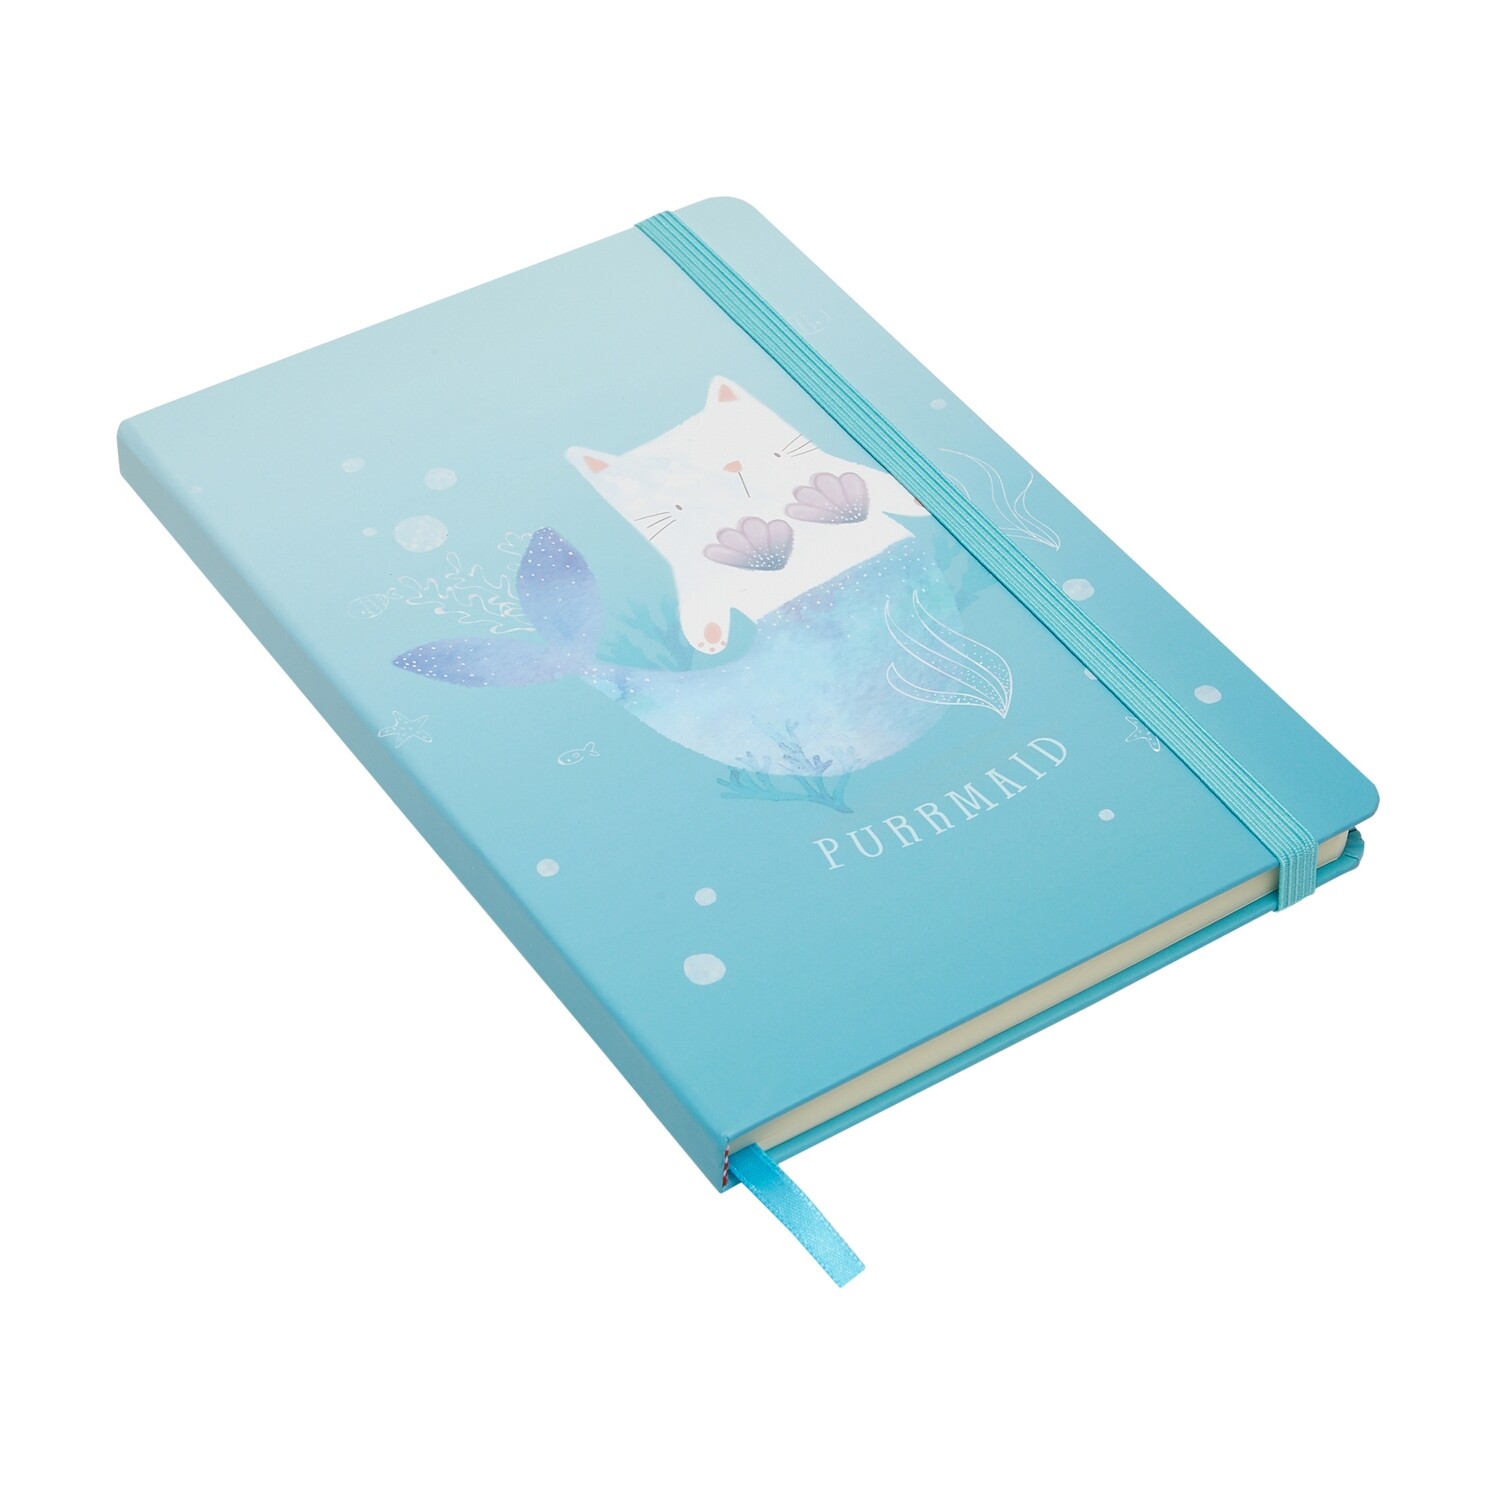 Under the Sea - Hardbound Lined Journal A5 Notebook